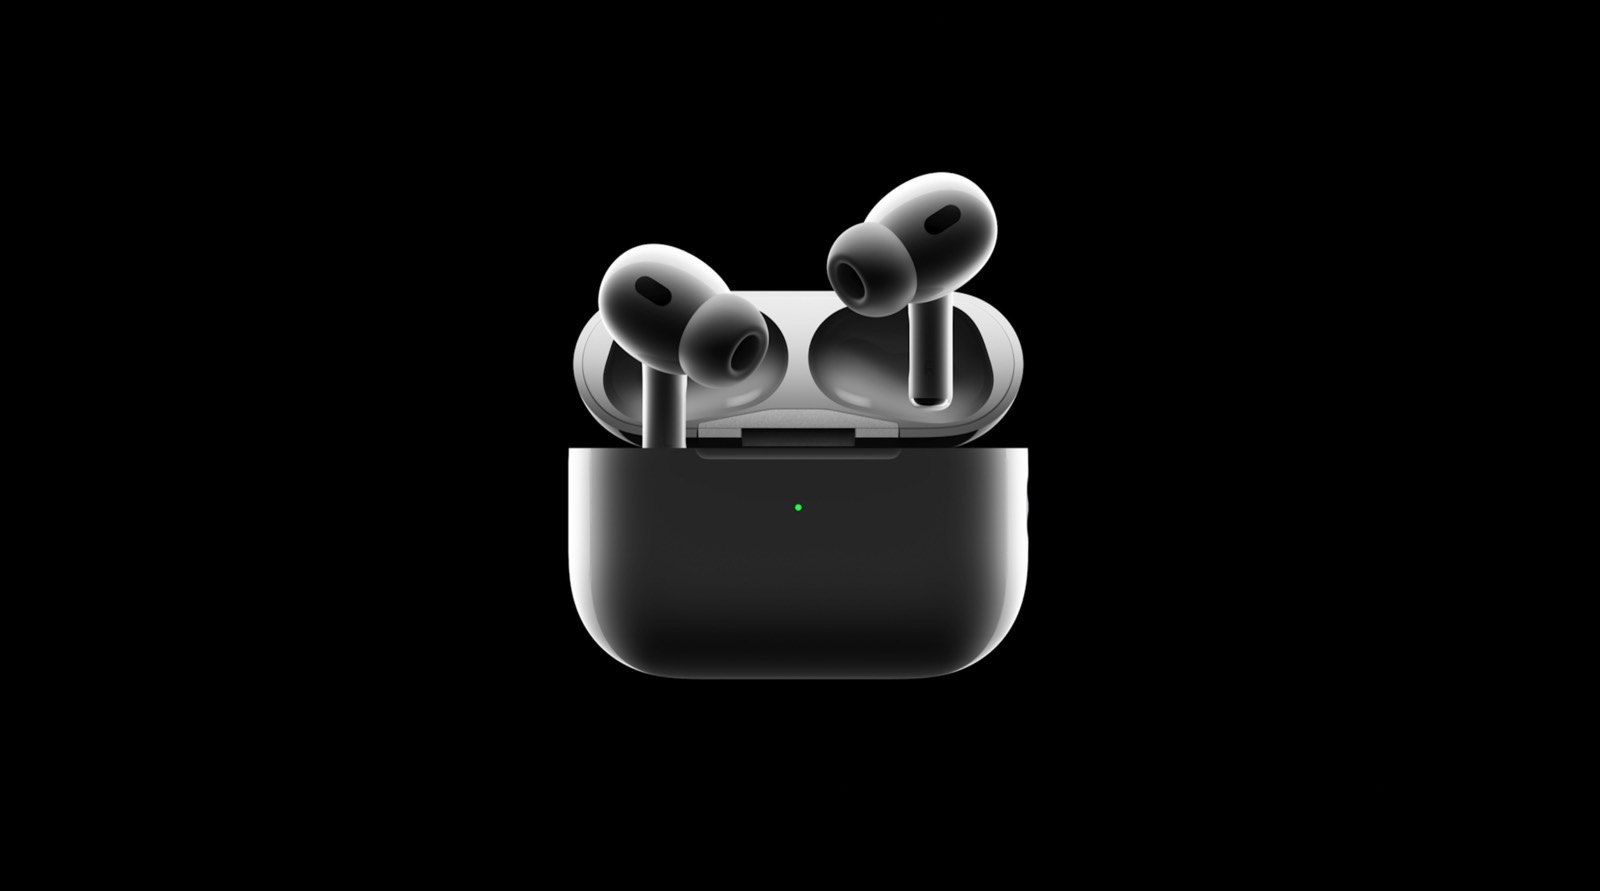 New AirPods Pro Apple S Best New Earbuds Are Now Up For Pre Order